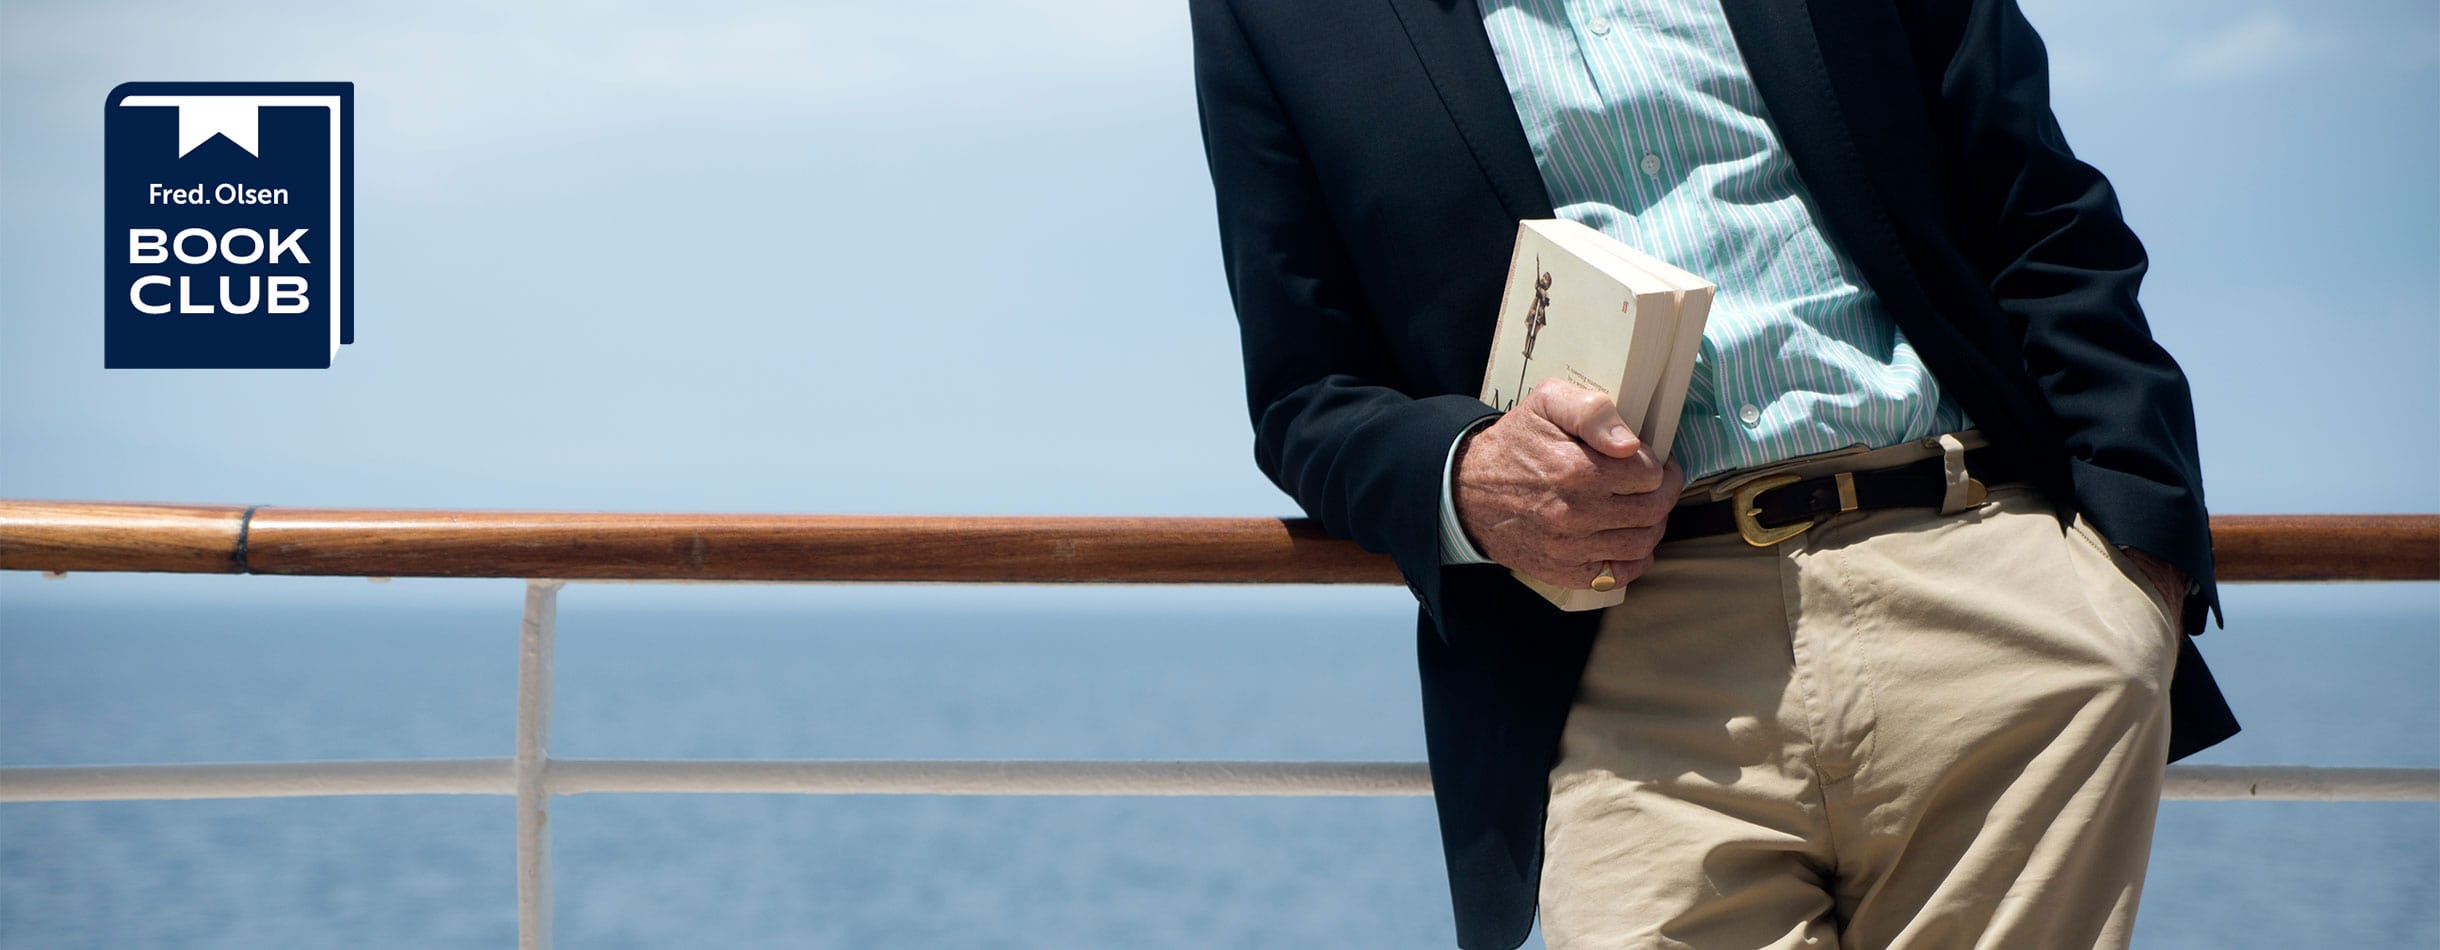 Man standing on deck with book in hand